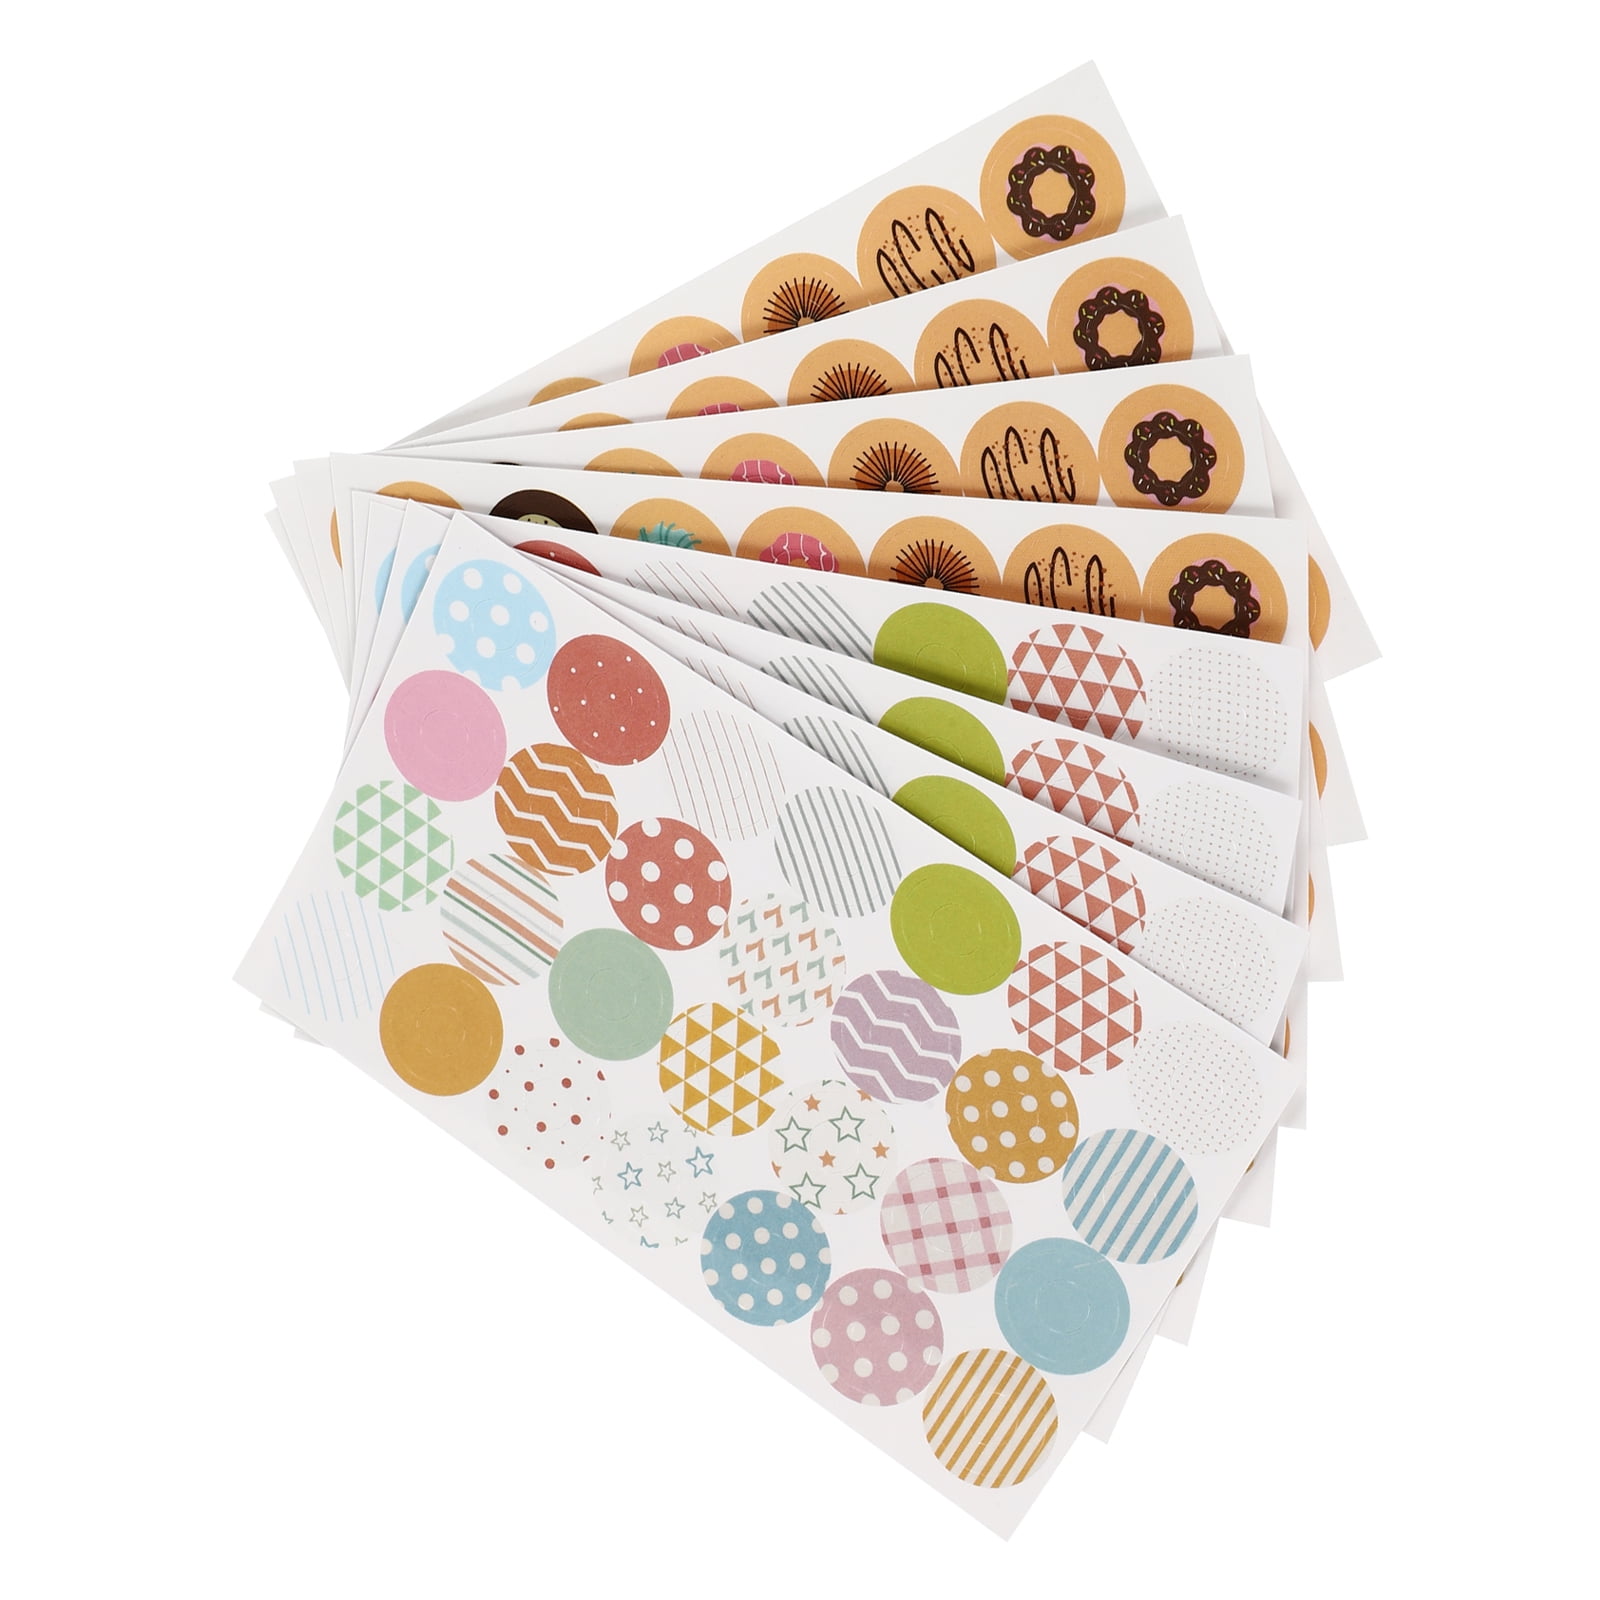  Tofficu 2pcs 10 Loose Leaf Stickers Loose-Leaf Paper Hole  Stickers Binder Paper Stickers Stickers Mini Binders Reinforcements for  Hole-Punched Pages Donut Stickers Sticker Labels Ring : Office Products